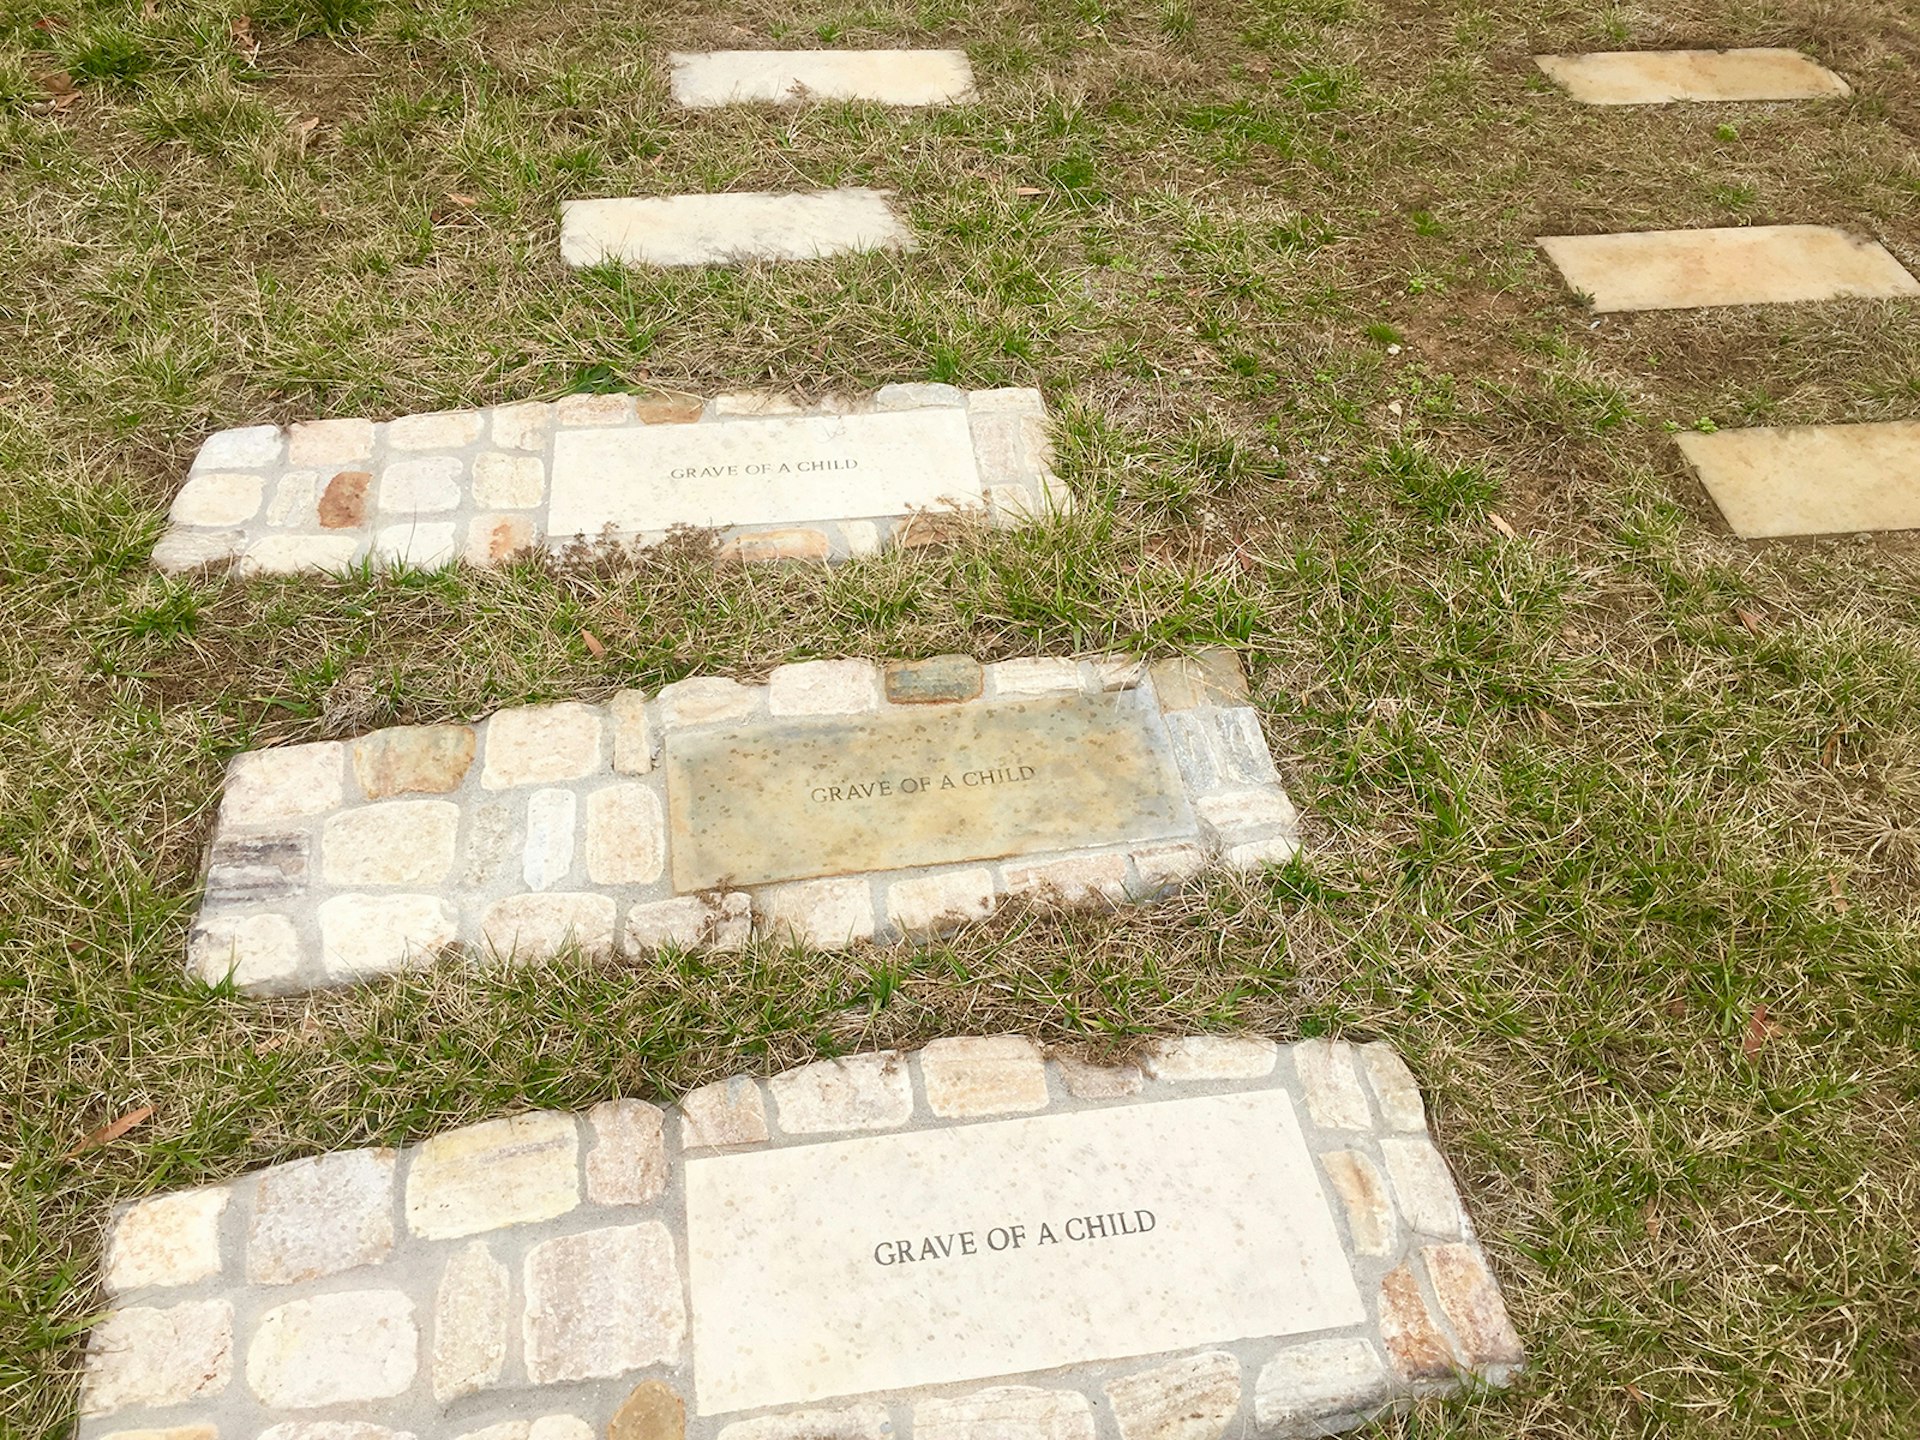 Graves of the unknown at the Contrabands and Freedmen Cemetery © Barbara Noe Kennedy / Lonely Planet